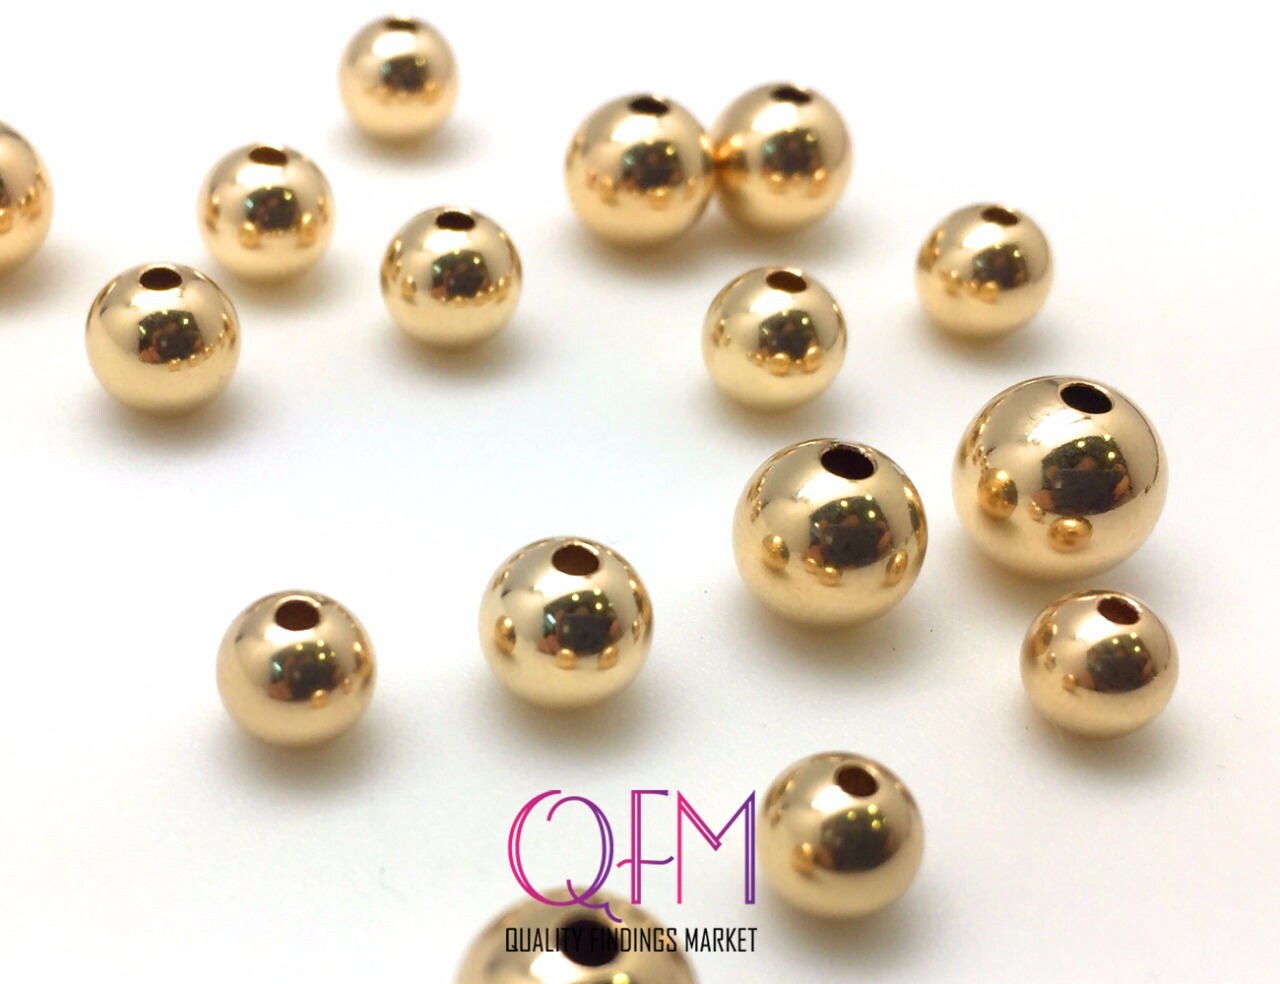 7mm Yellow Gold Filled Letter Beads - N